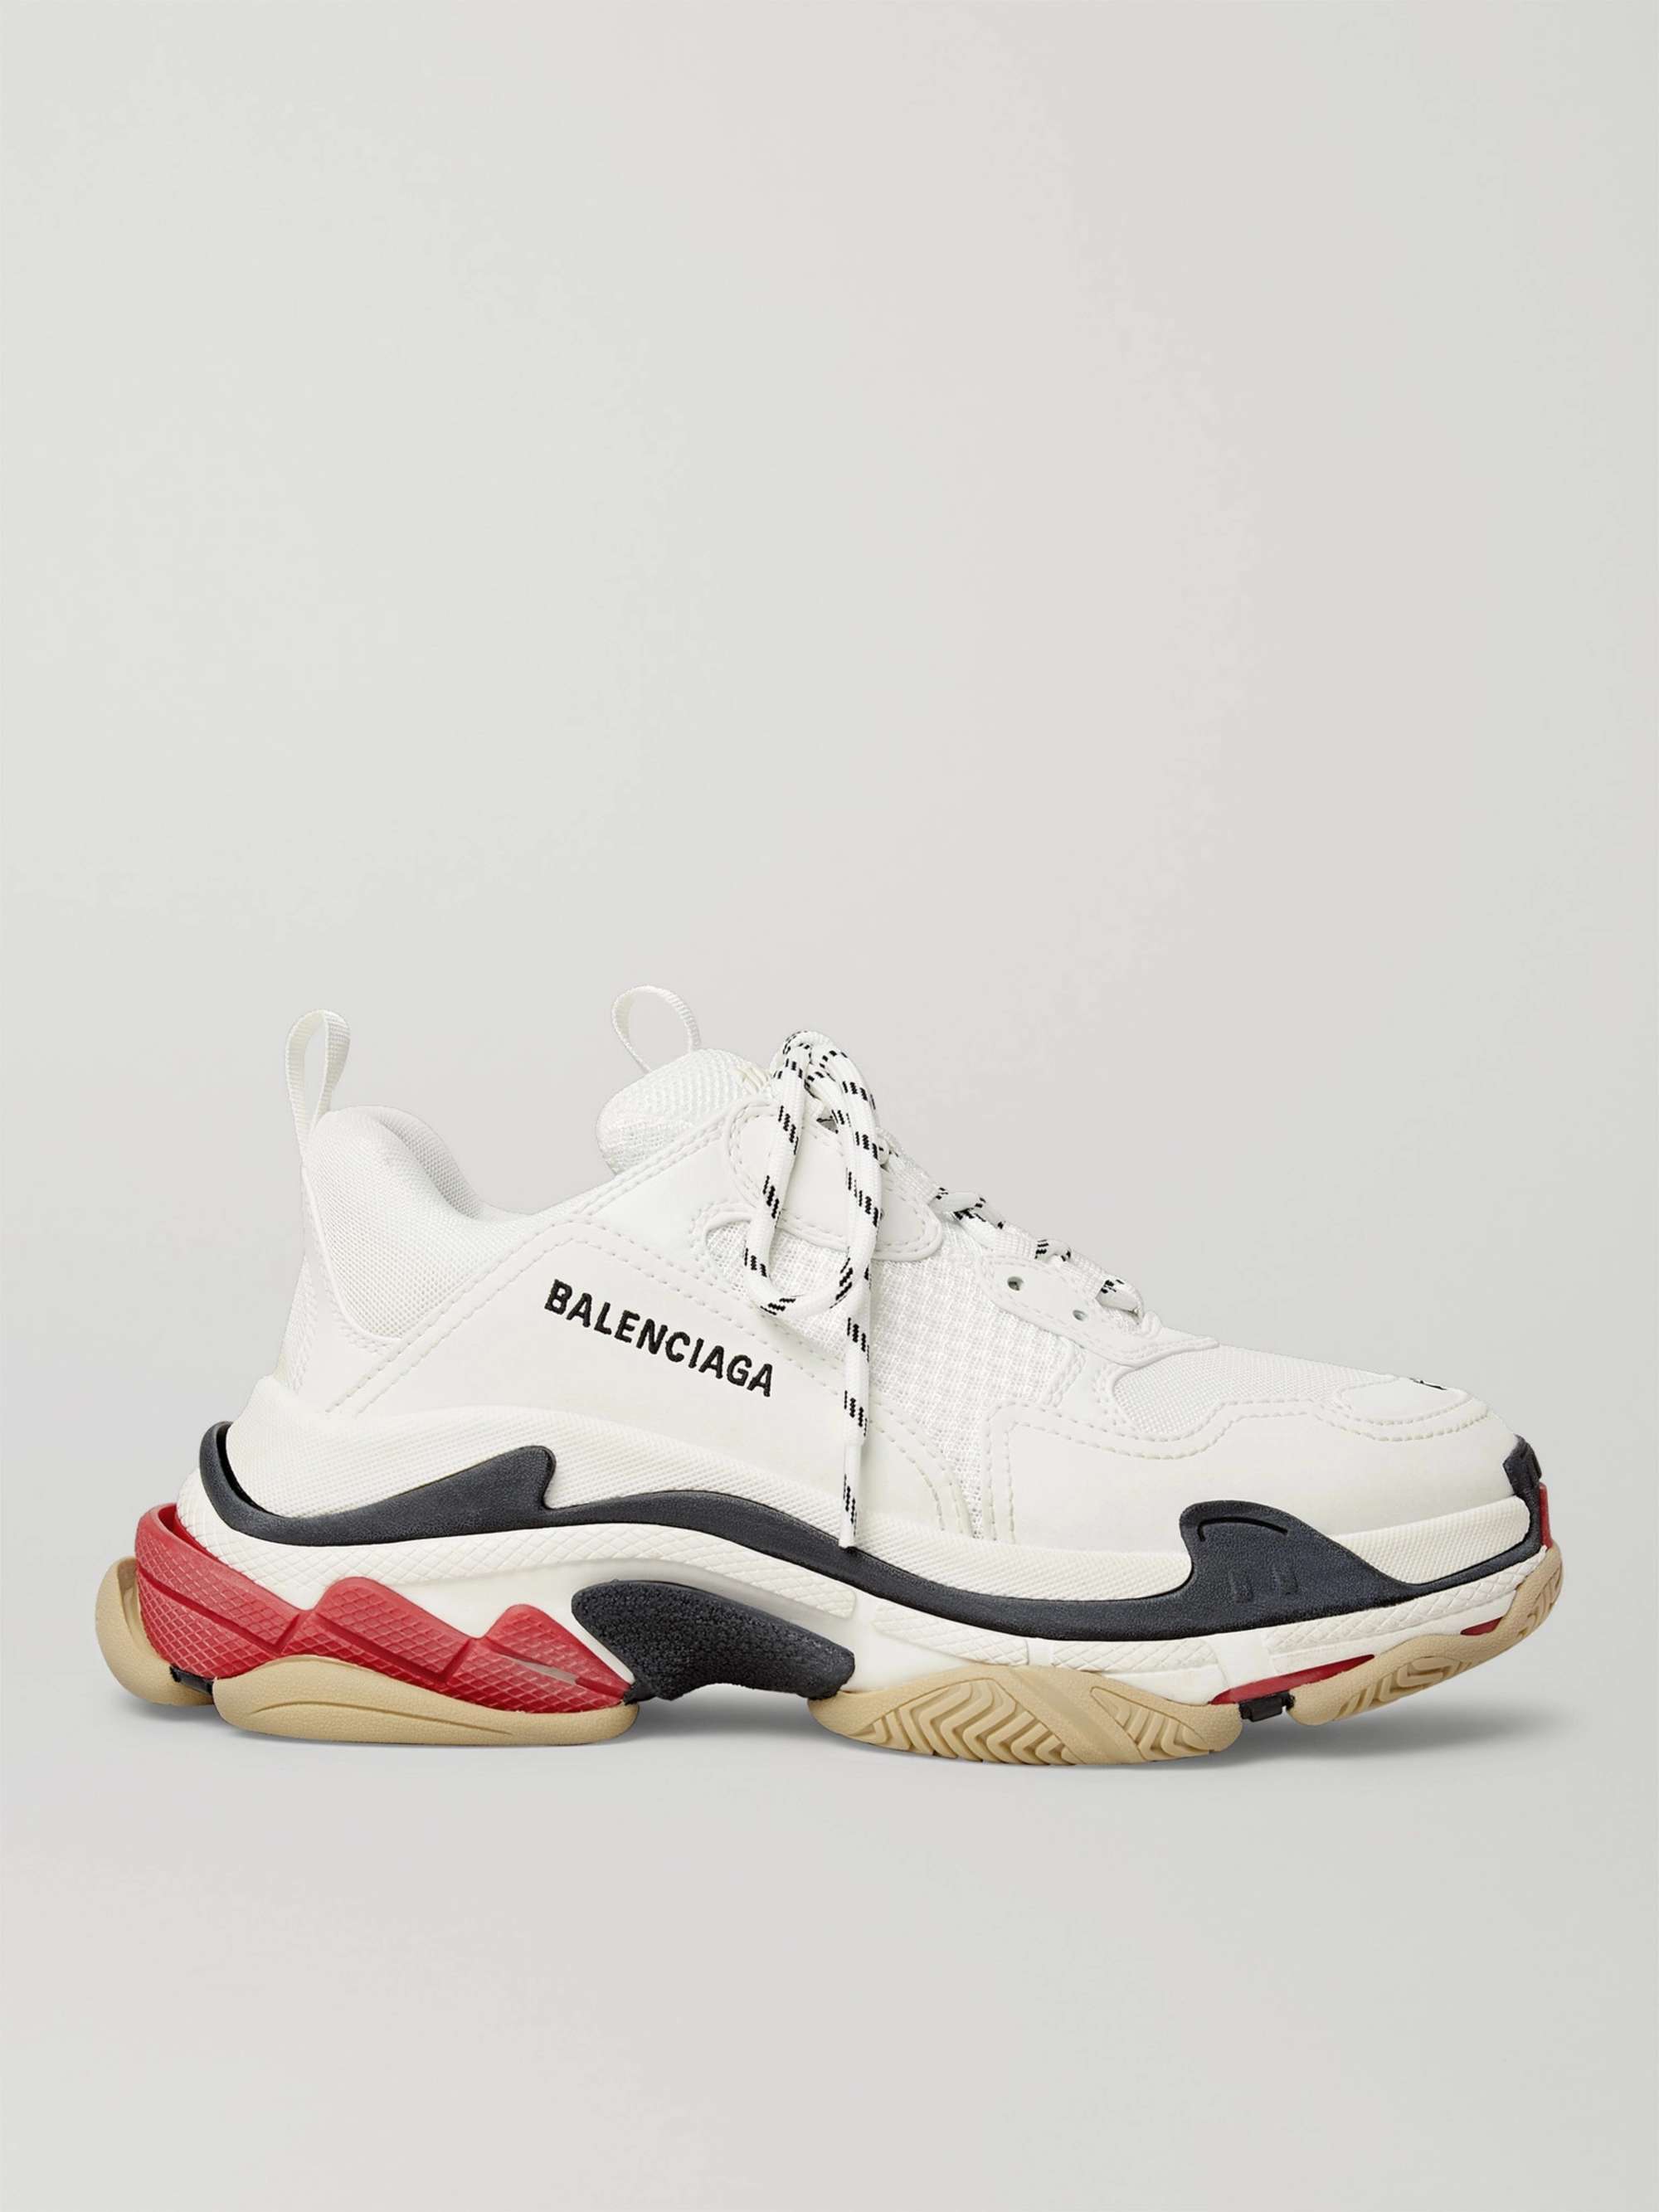 BALENCIAGA Triple S Mesh and Faux Leather Sneakers | MR PORTER